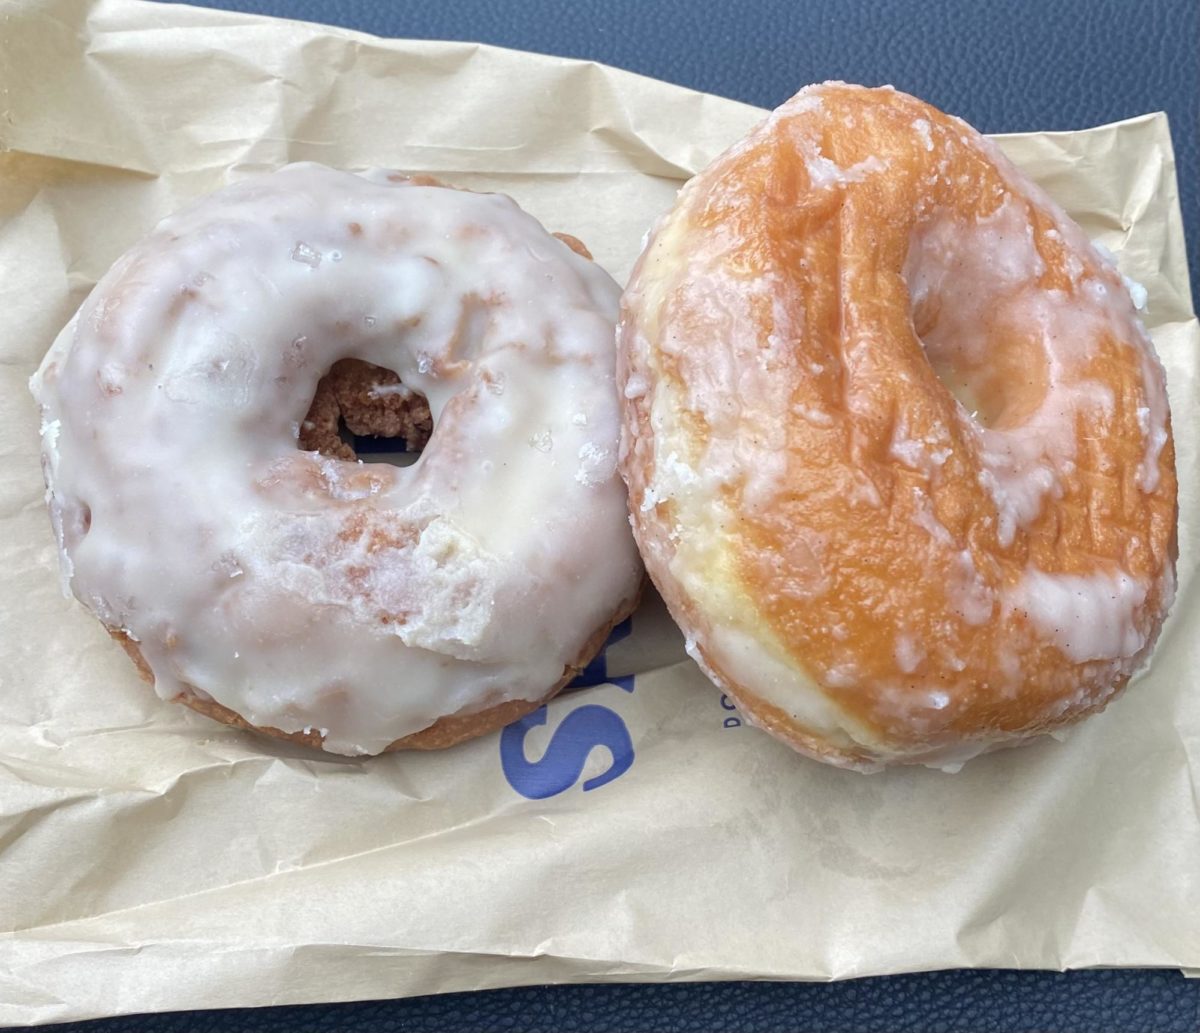 The Brown Sugar Saltcake donut and Traditional Glazed Donut from The Salty Donut. 